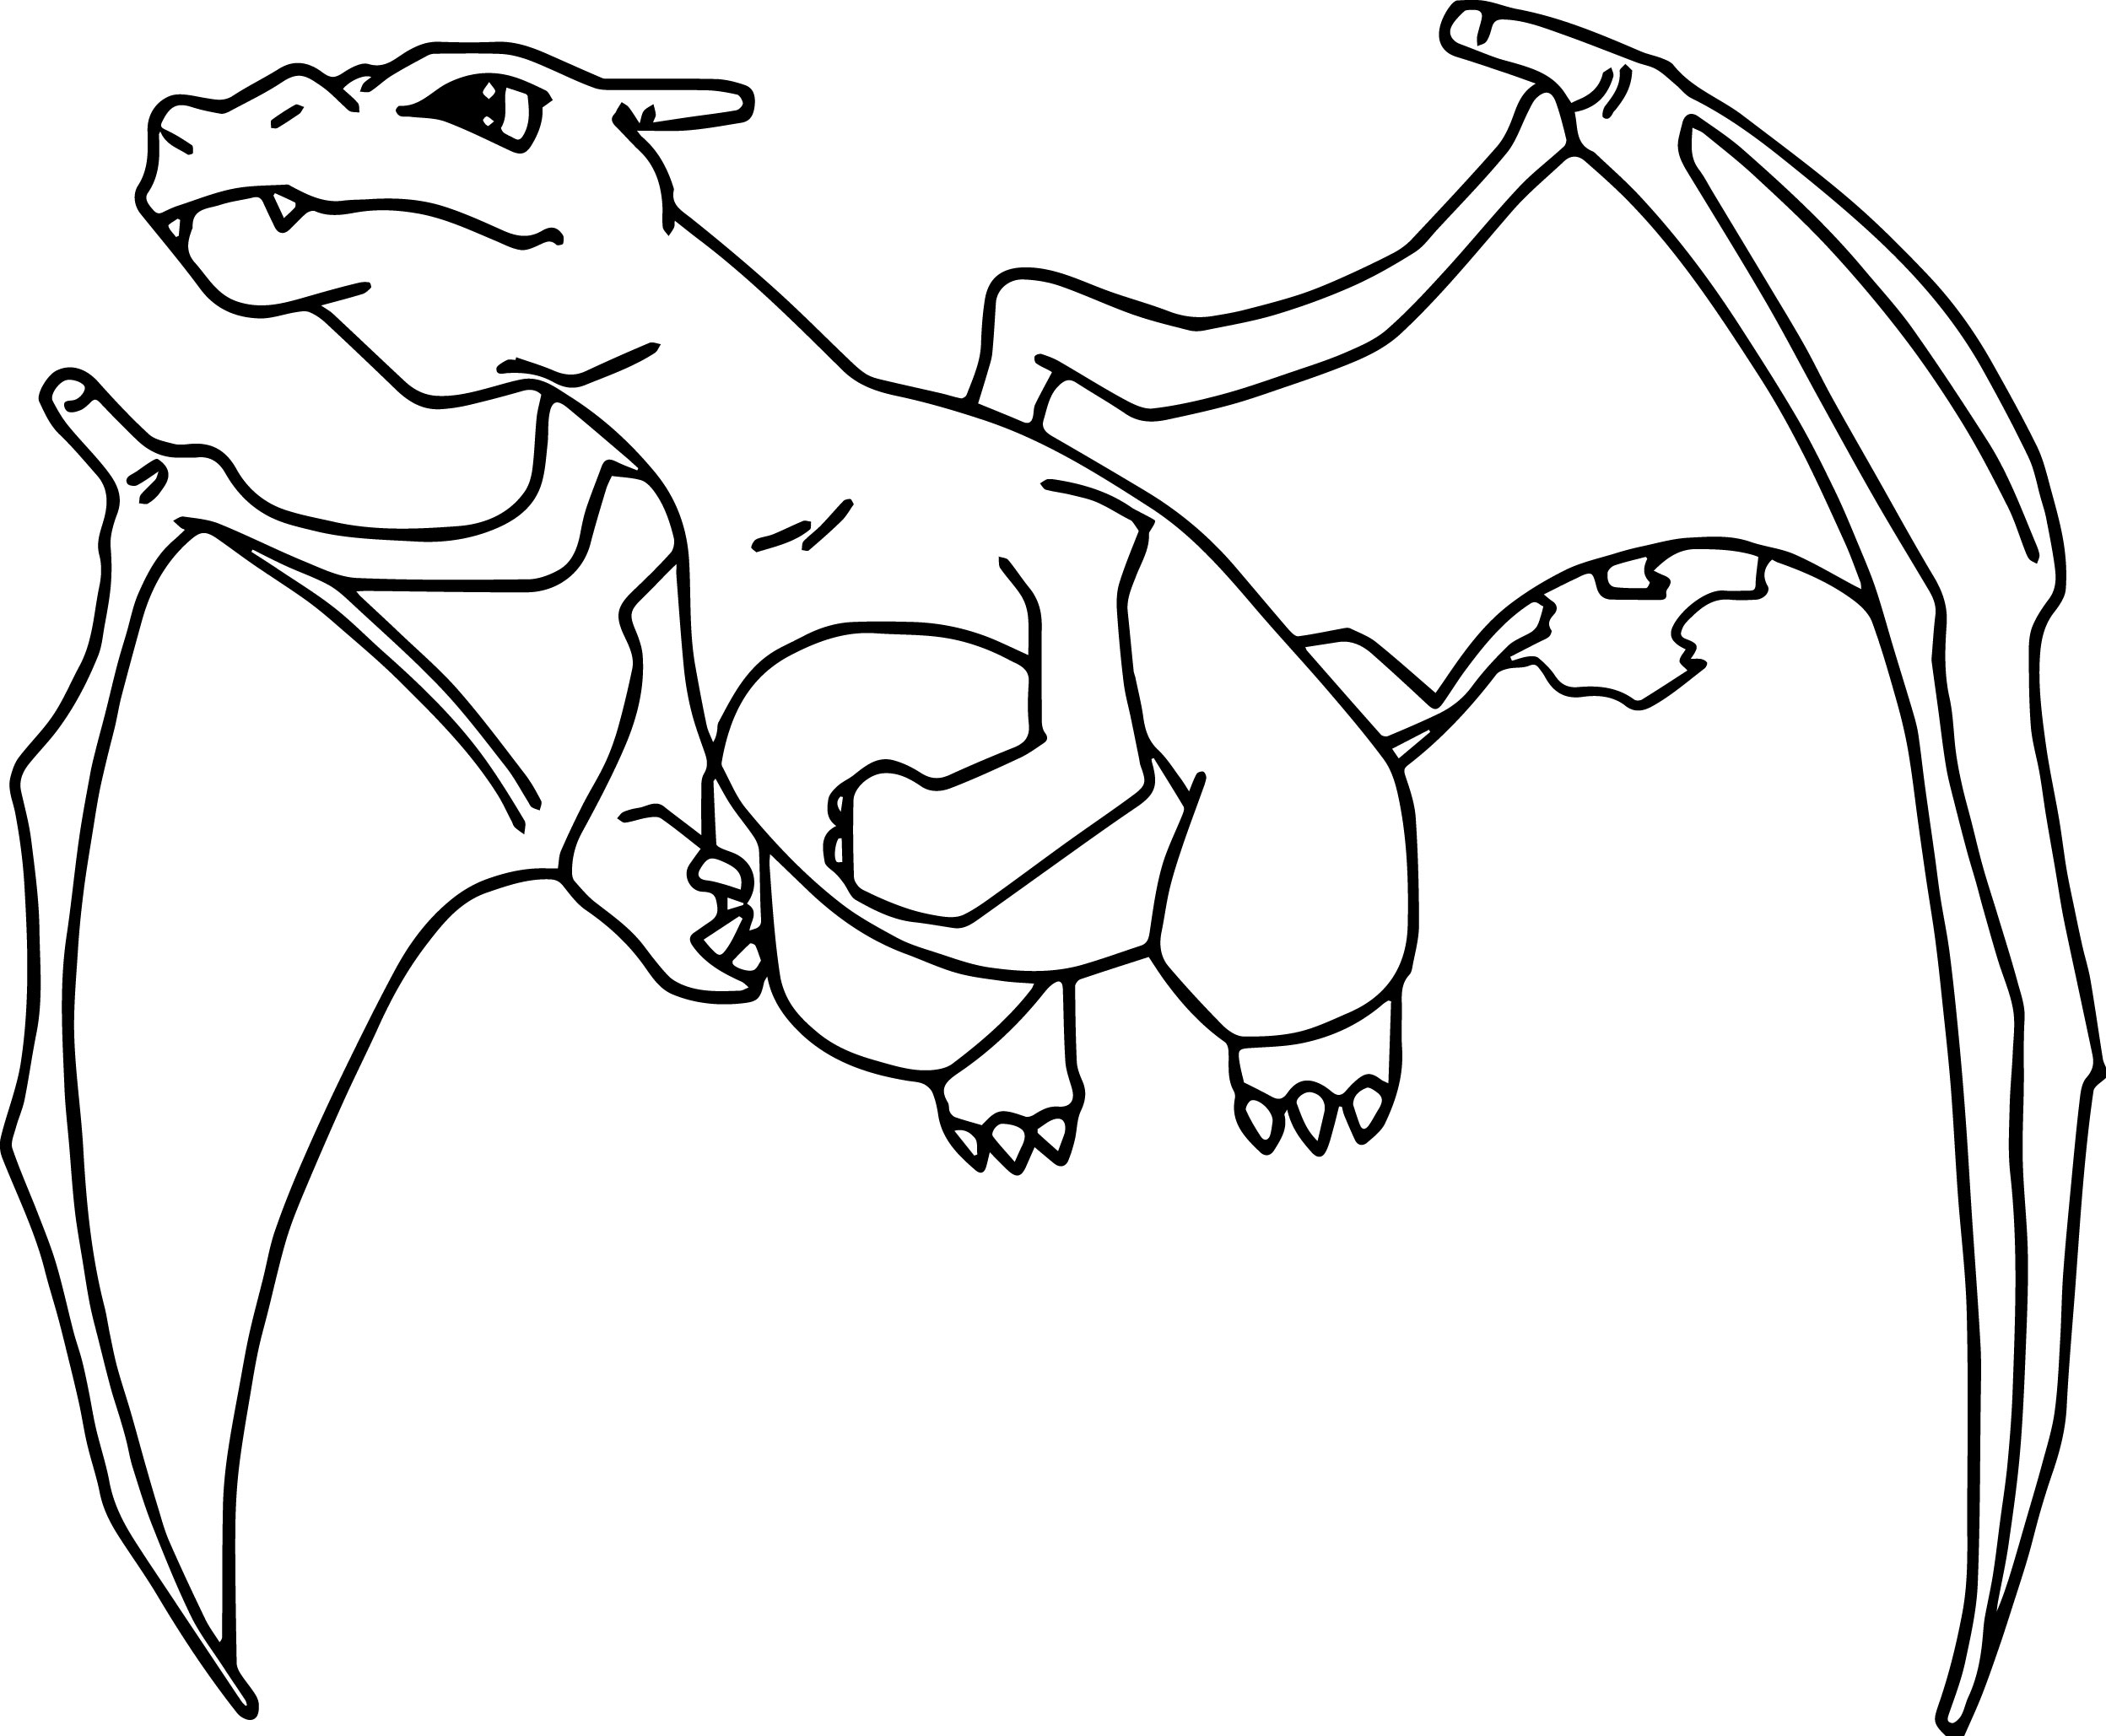 pokemon-mega-charizard-coloring-pages-at-getcolorings-free-printable-colorings-pages-to